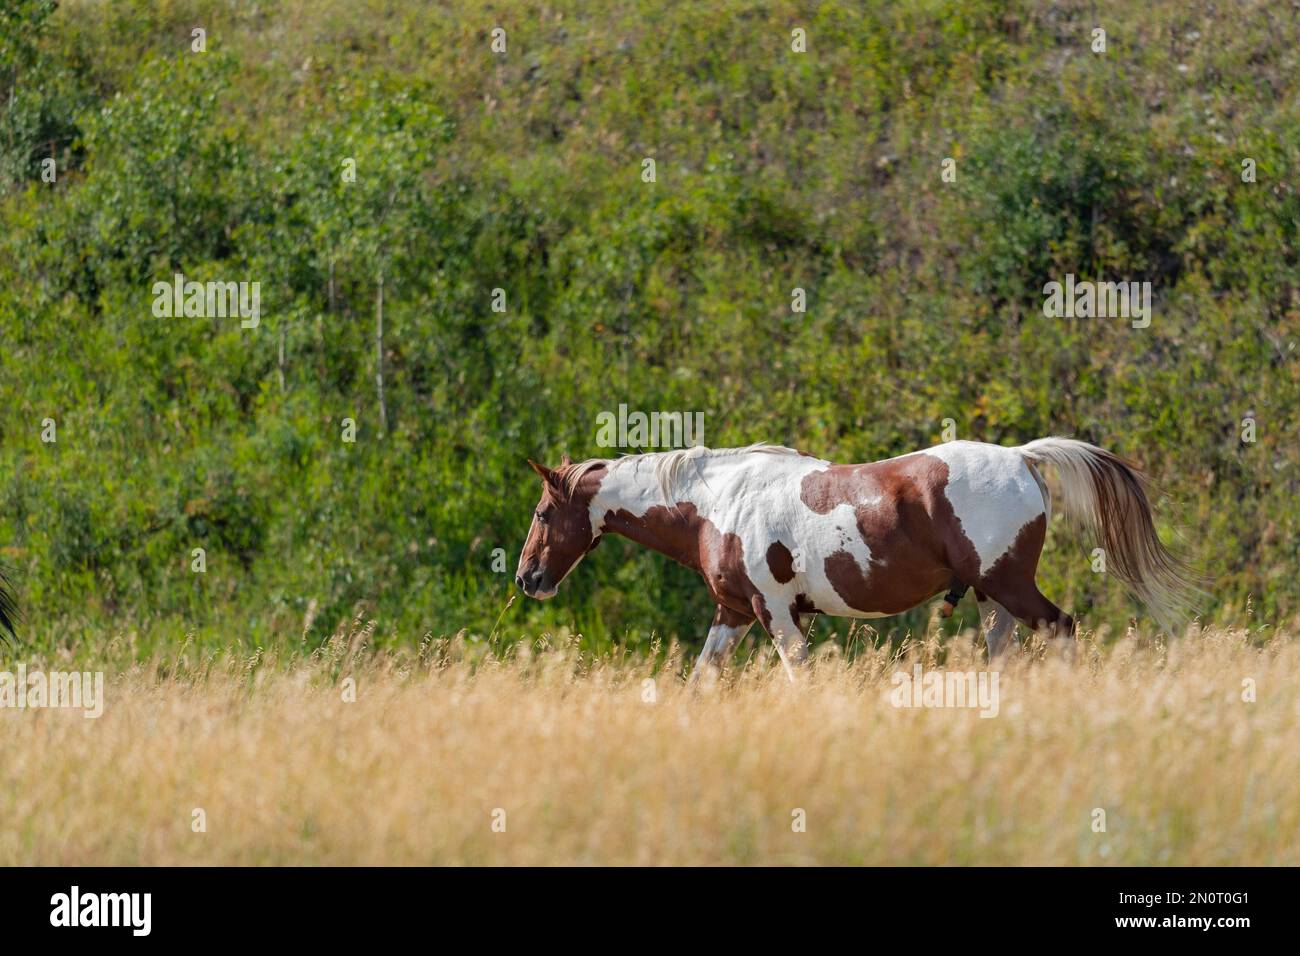 Painted horse grazing in the foothills of the rocky mountains Stock Photo